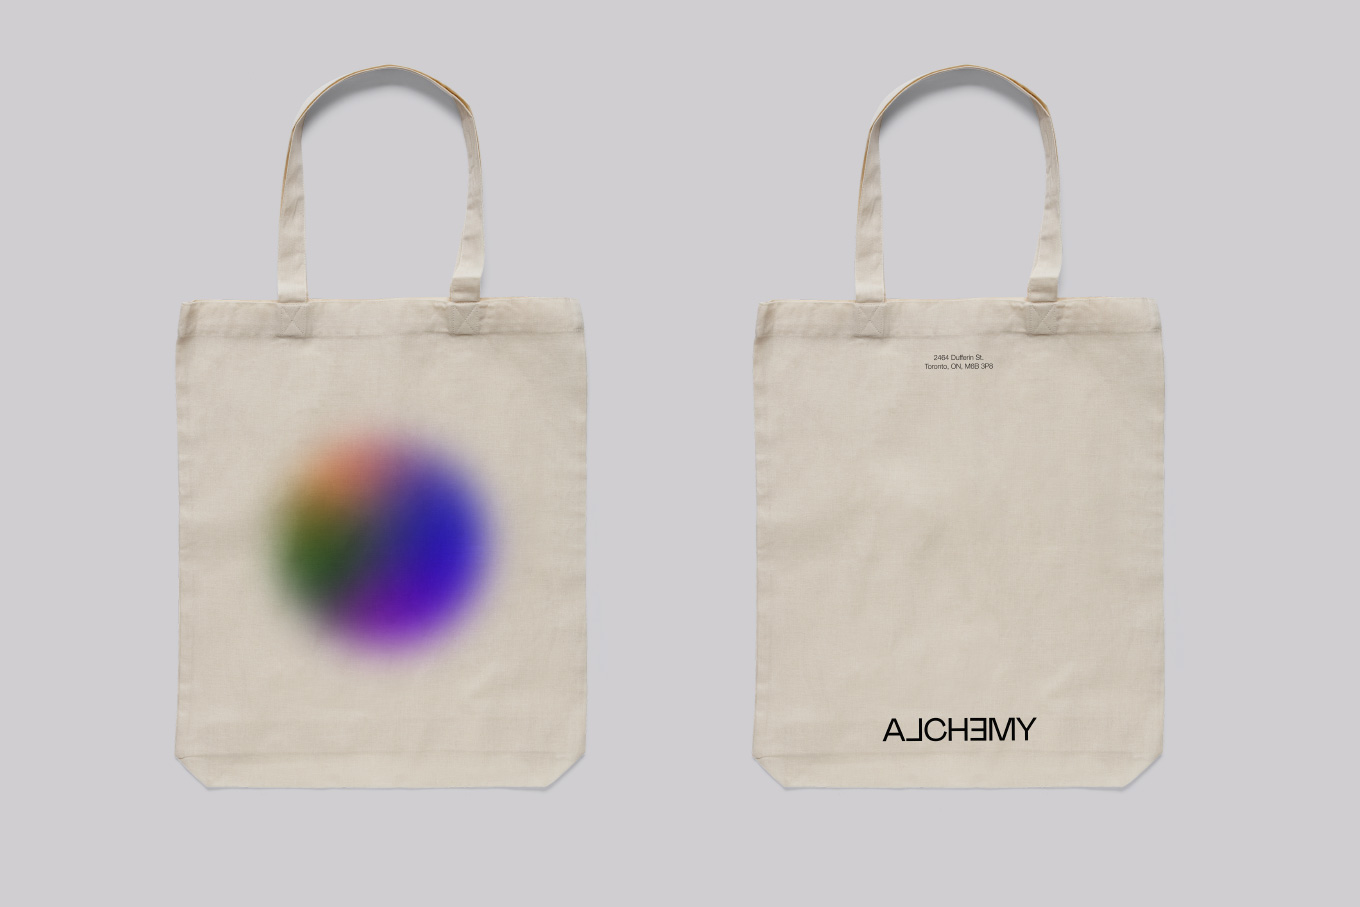 Tote bag with Alchemy branding